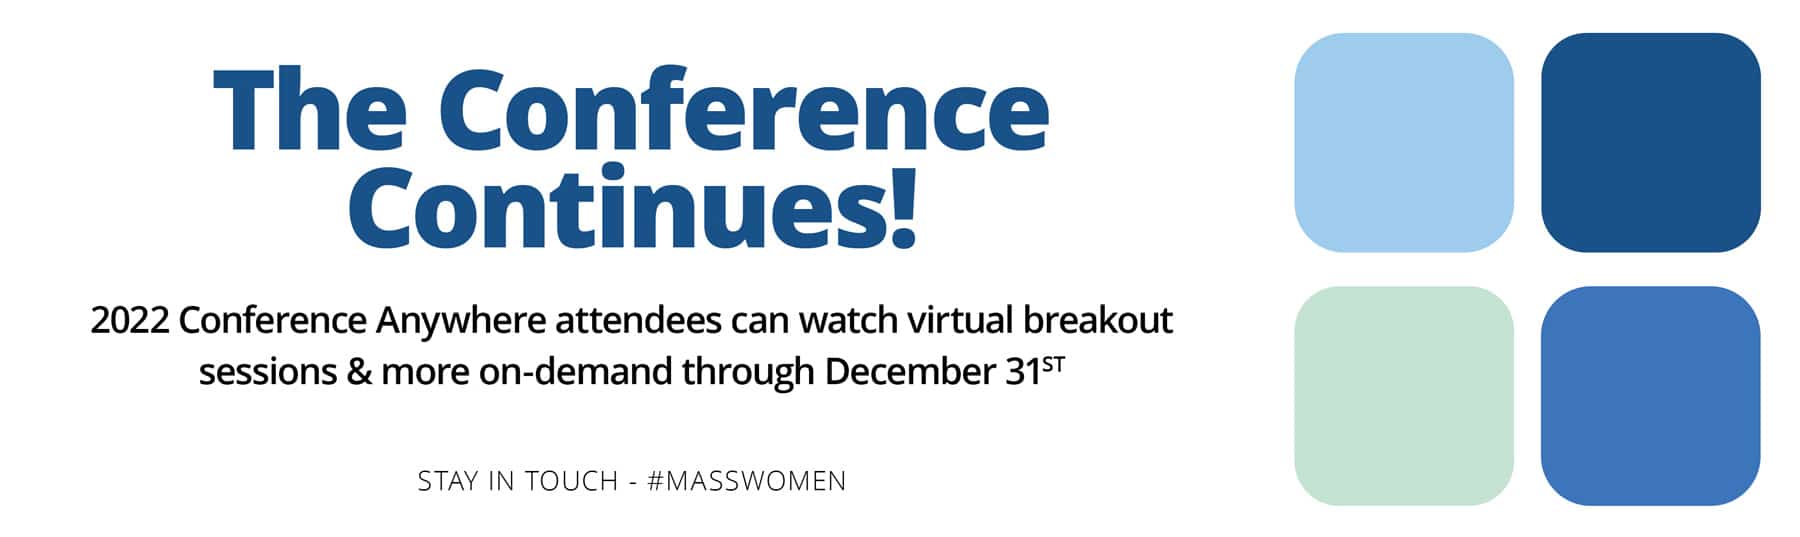 The Conference Continues! Watch virtual breakout sessions and more on demand through December 31st!